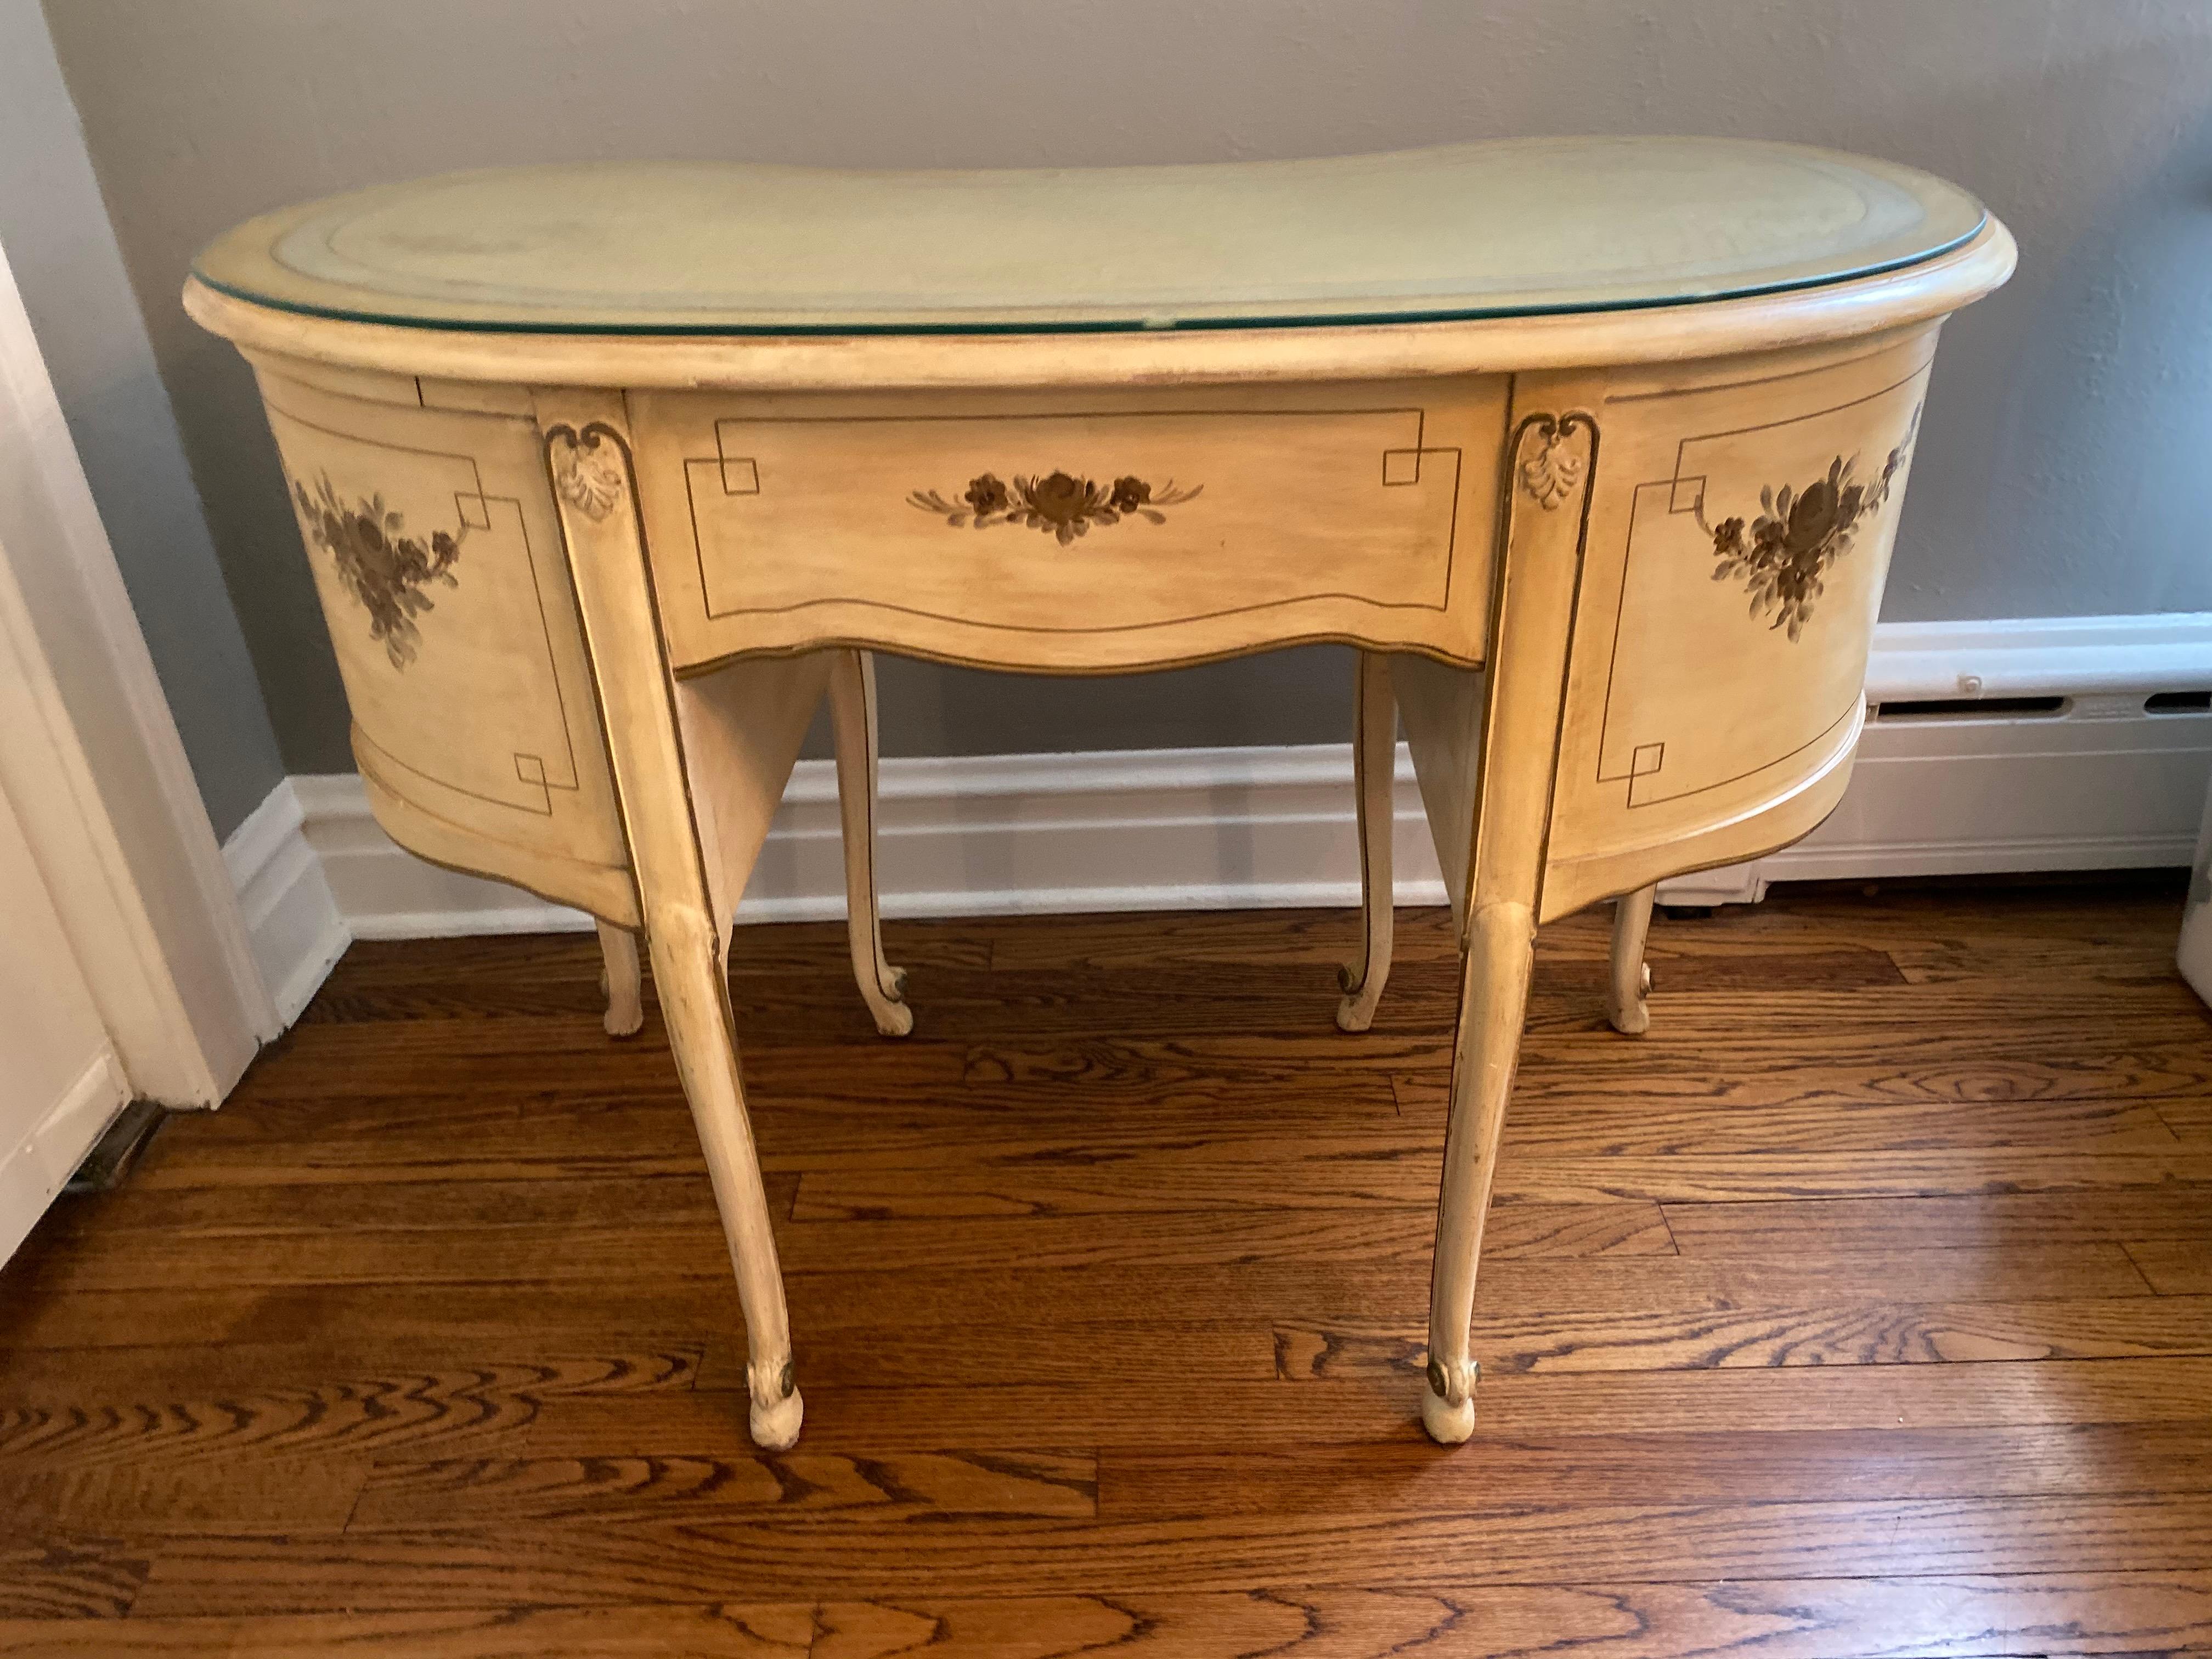 Vintage hand painted ladies vanity or writing desk
kidney shaped, delicate cabriole legs, antique white hand rubbed with sweet hand painted detail on all sides.
Stunning 19th century French Louis XVI lady's vanity / writing desk . This Gorgeous